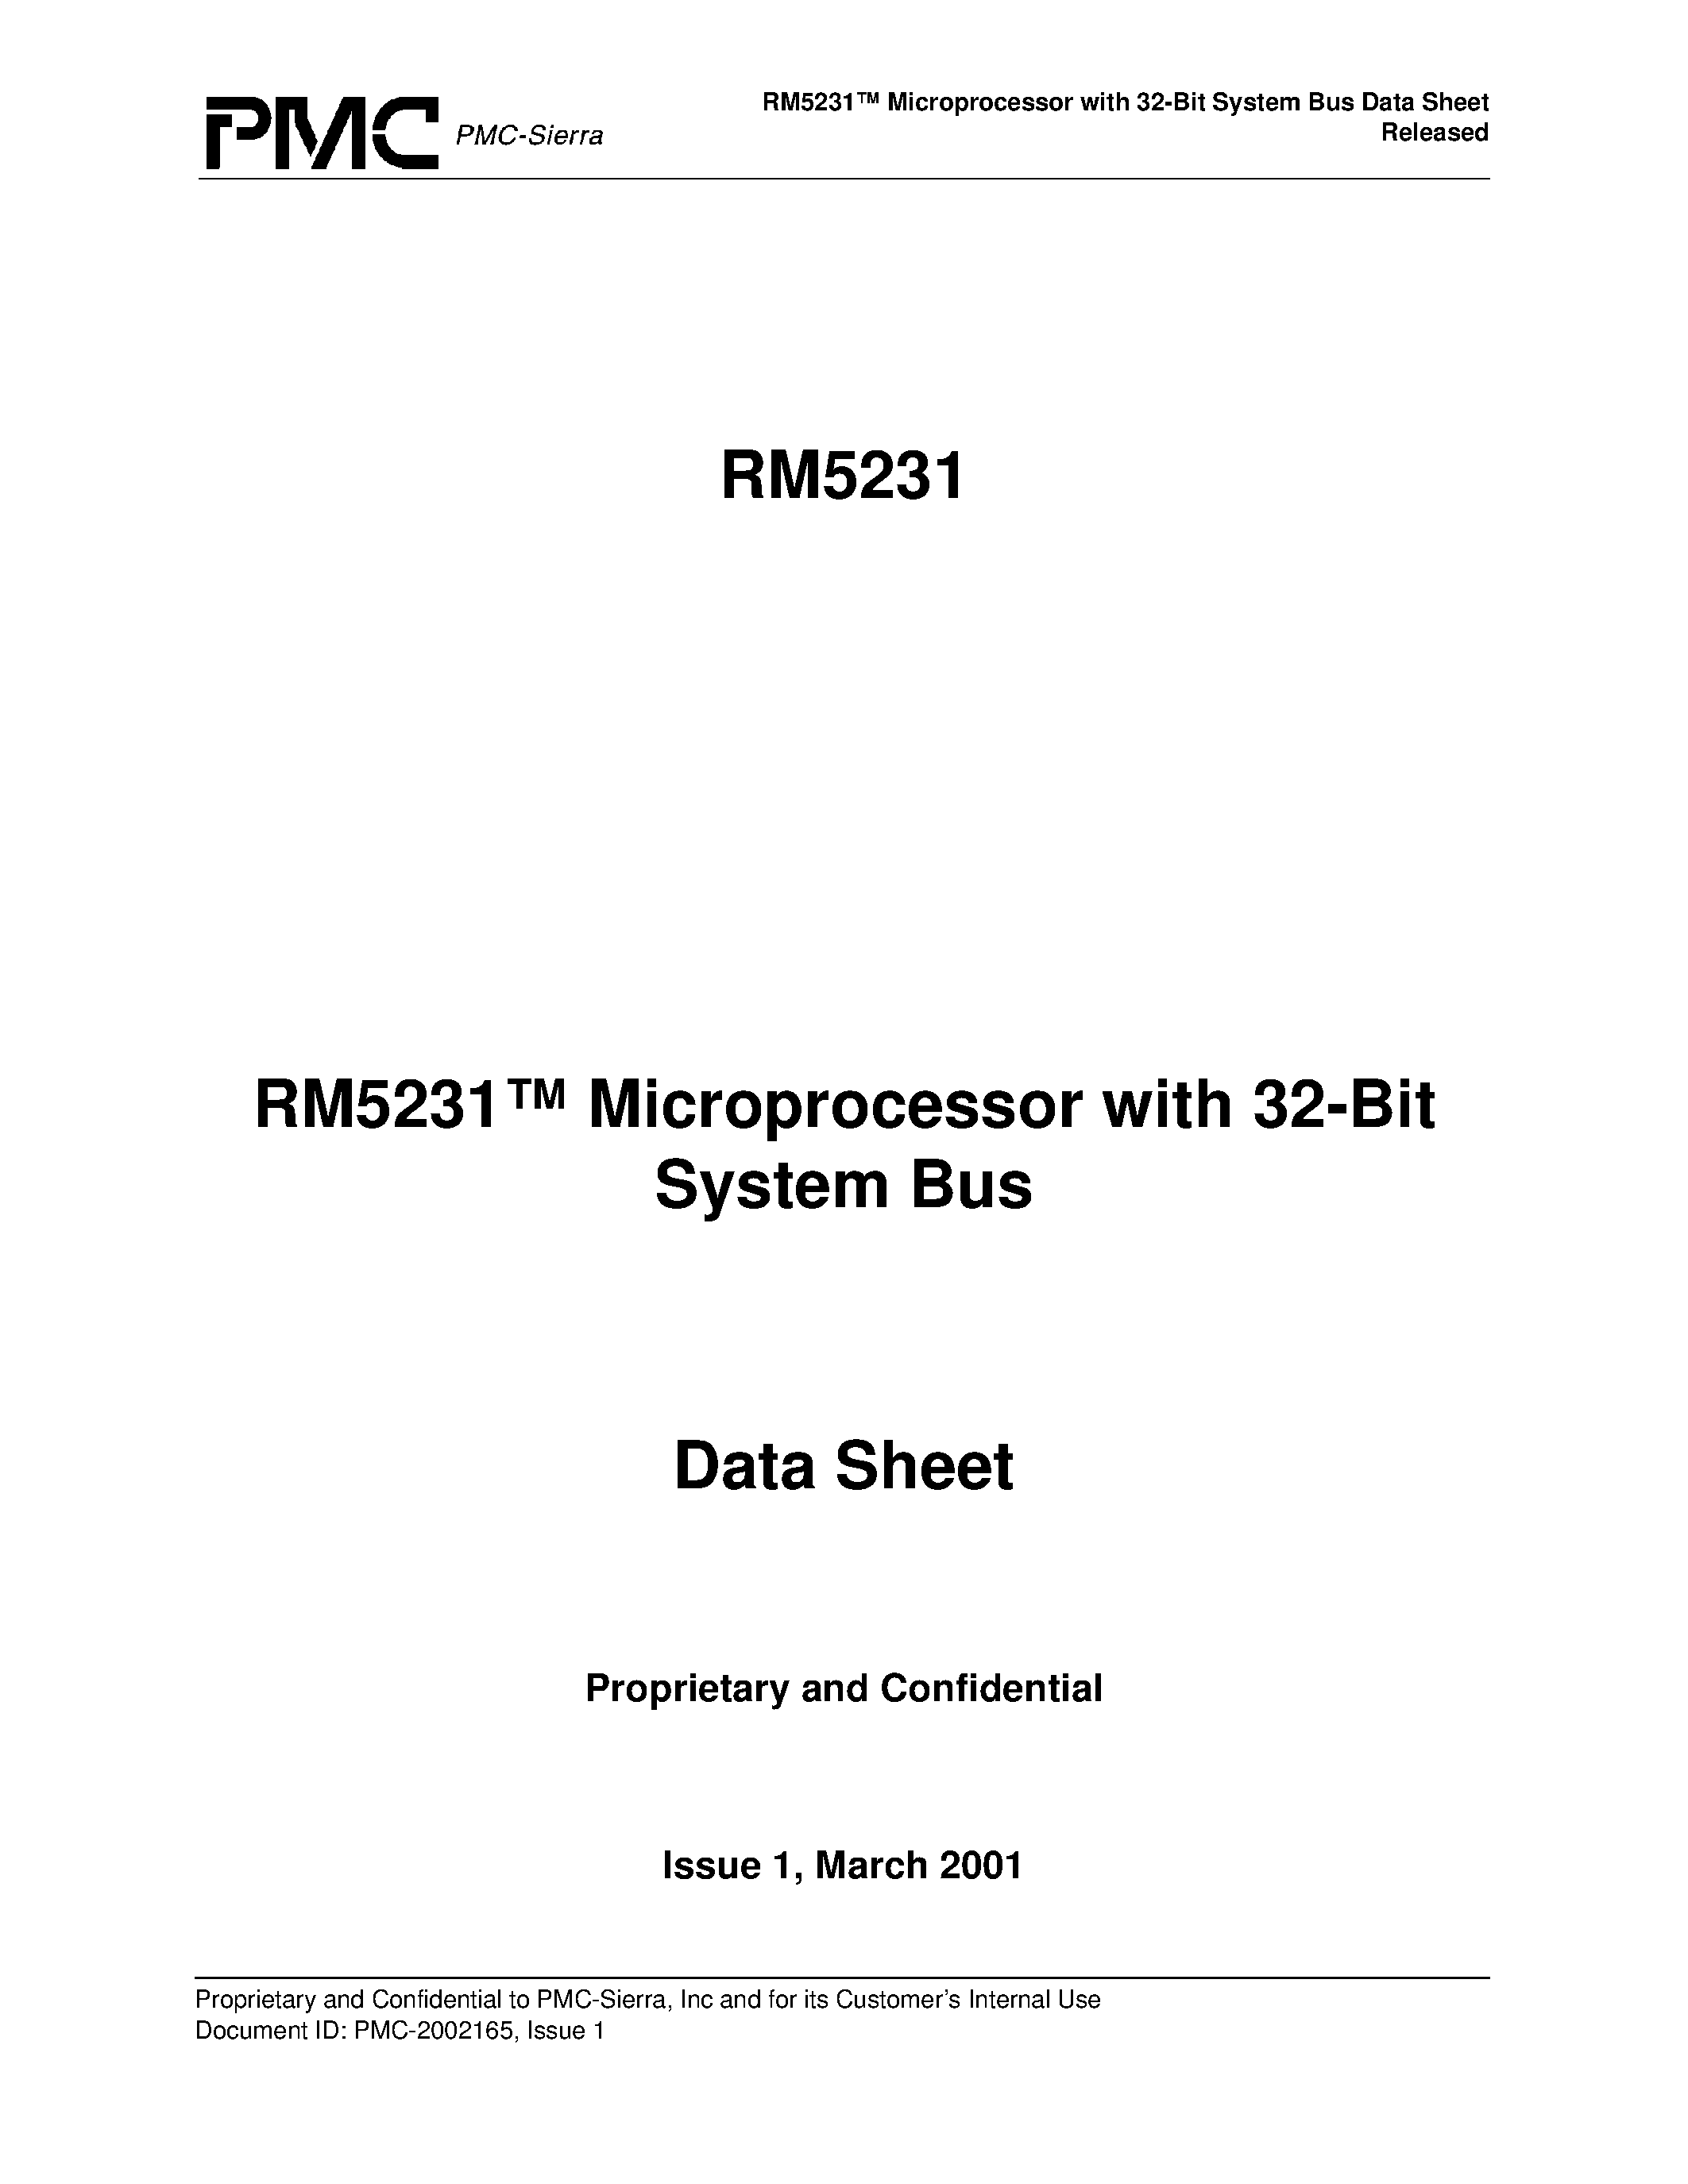 Datasheet RM5231-200-Q - RM5231 Microprocessor with 32-Bit System Bus Data Sheet Released page 1